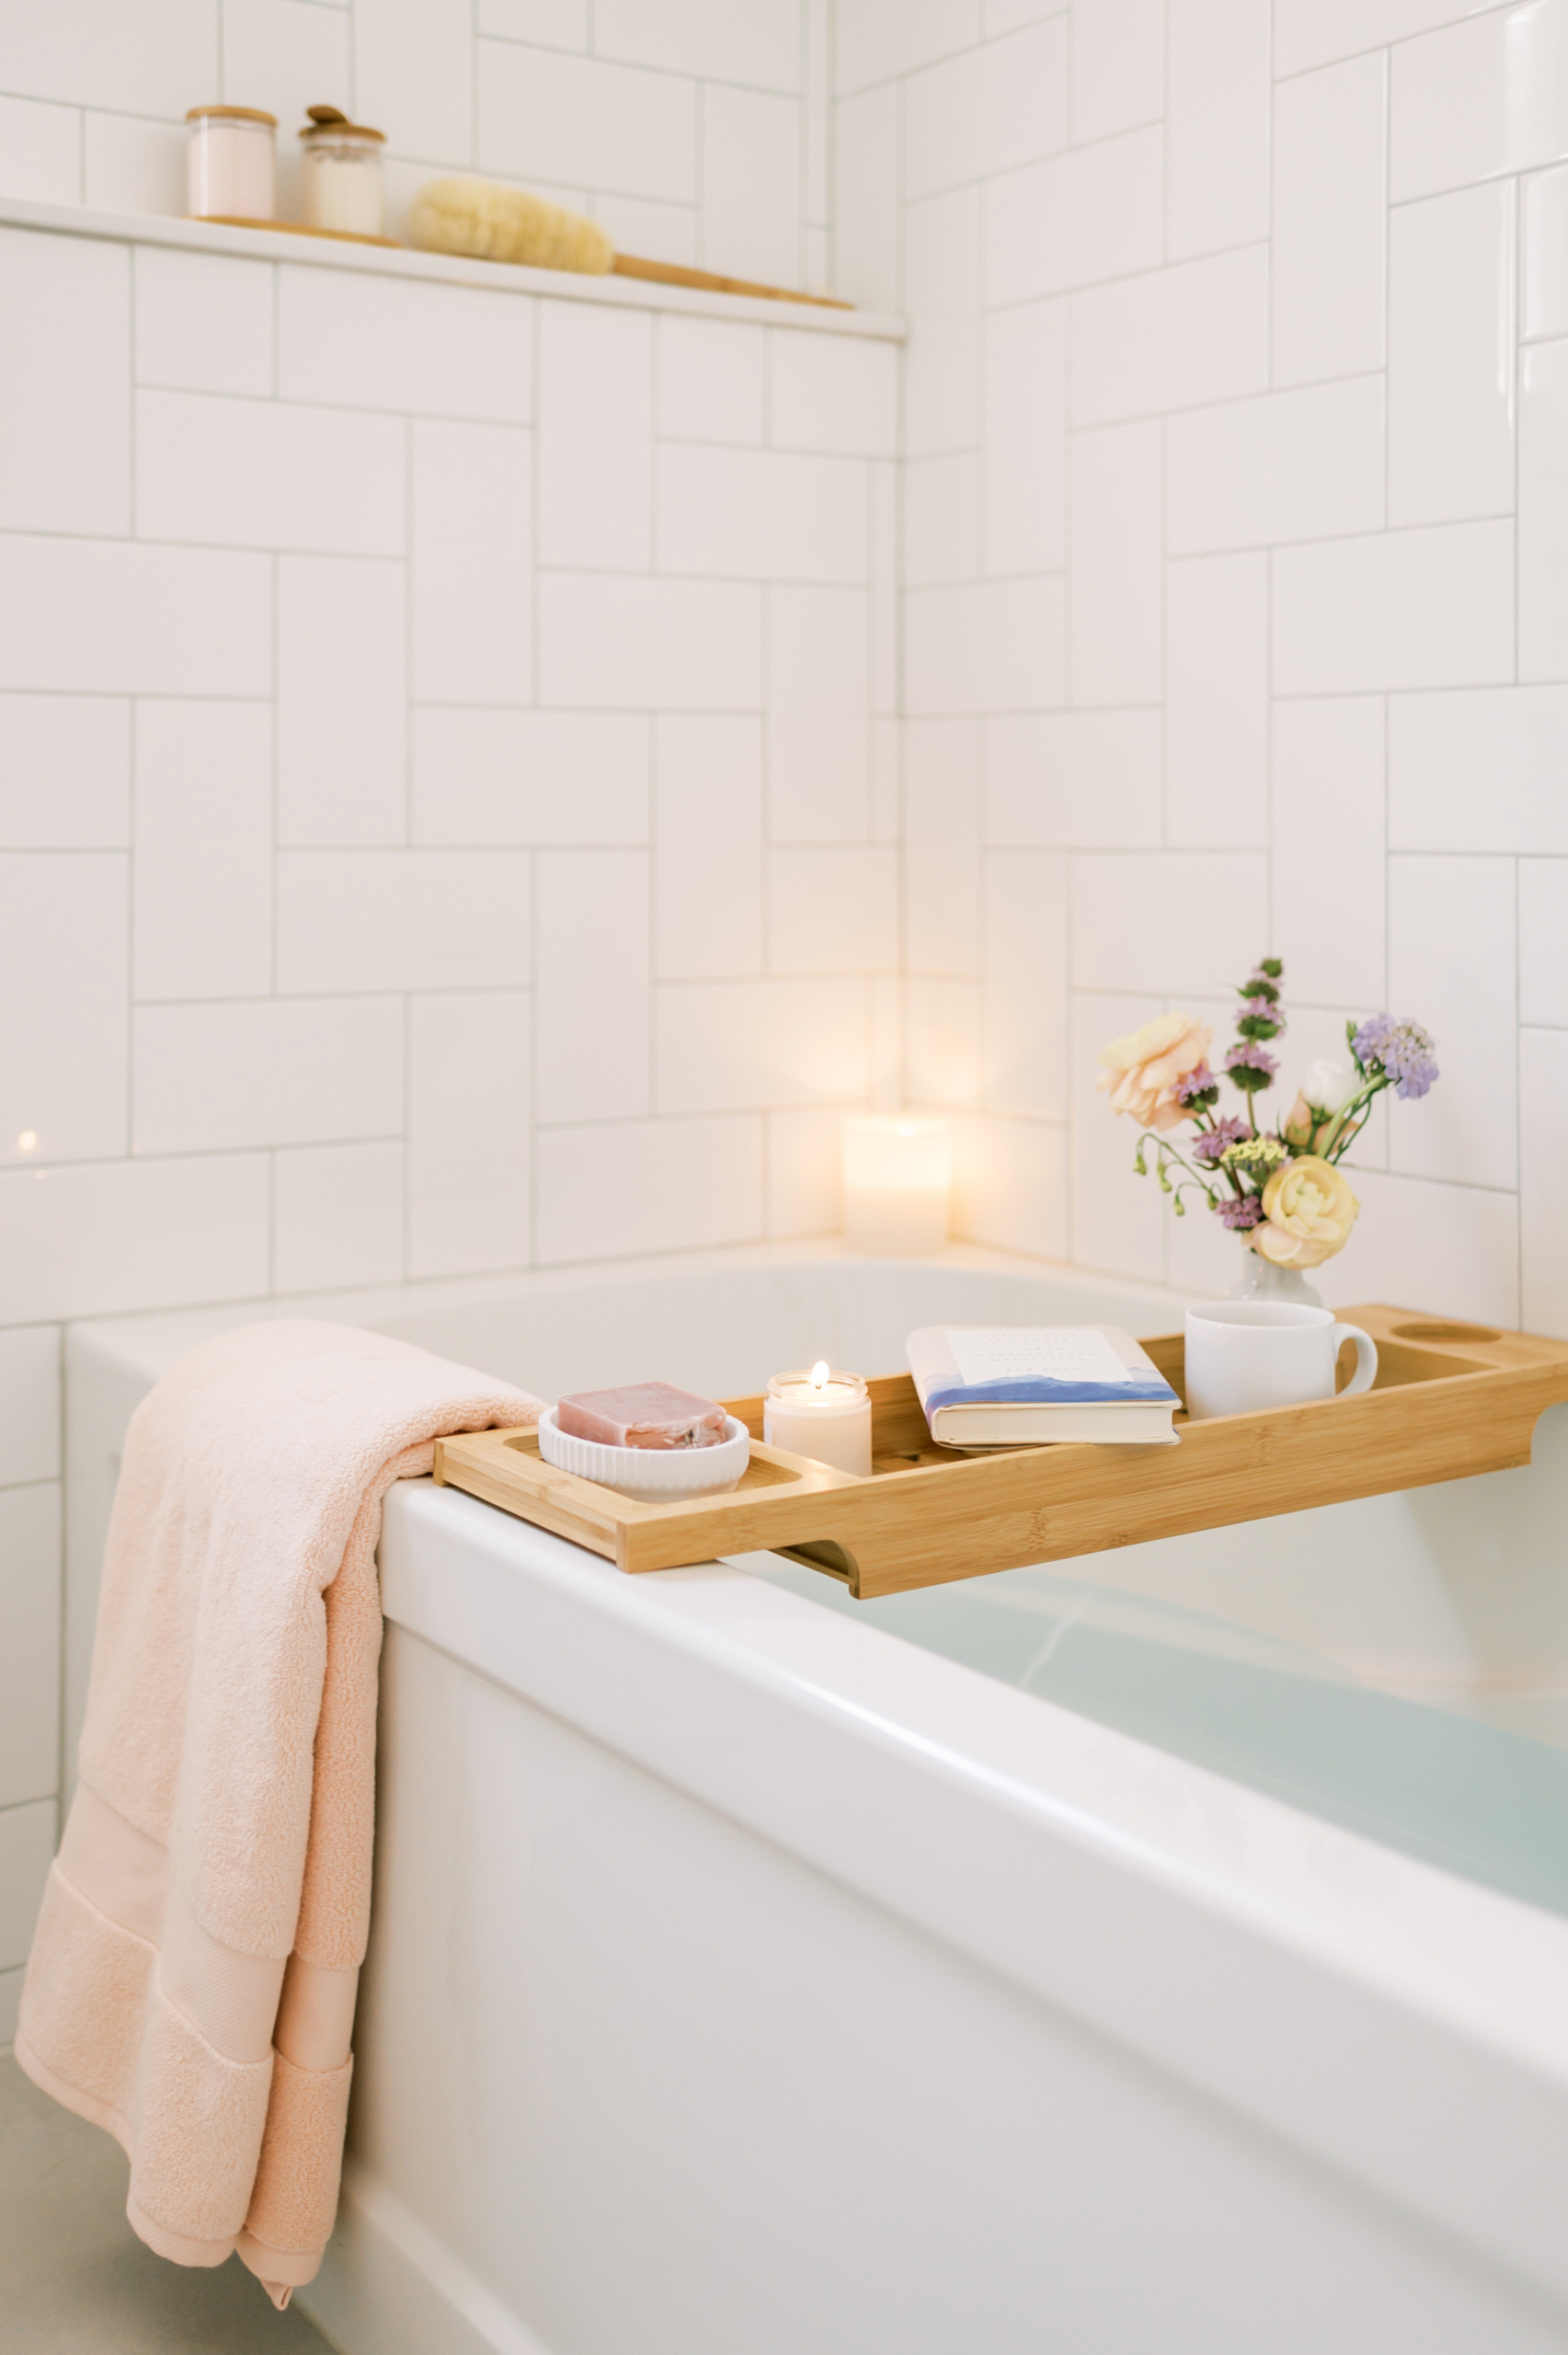 Bath tray filled with a book, candle, flowers, and soap over a filled tub